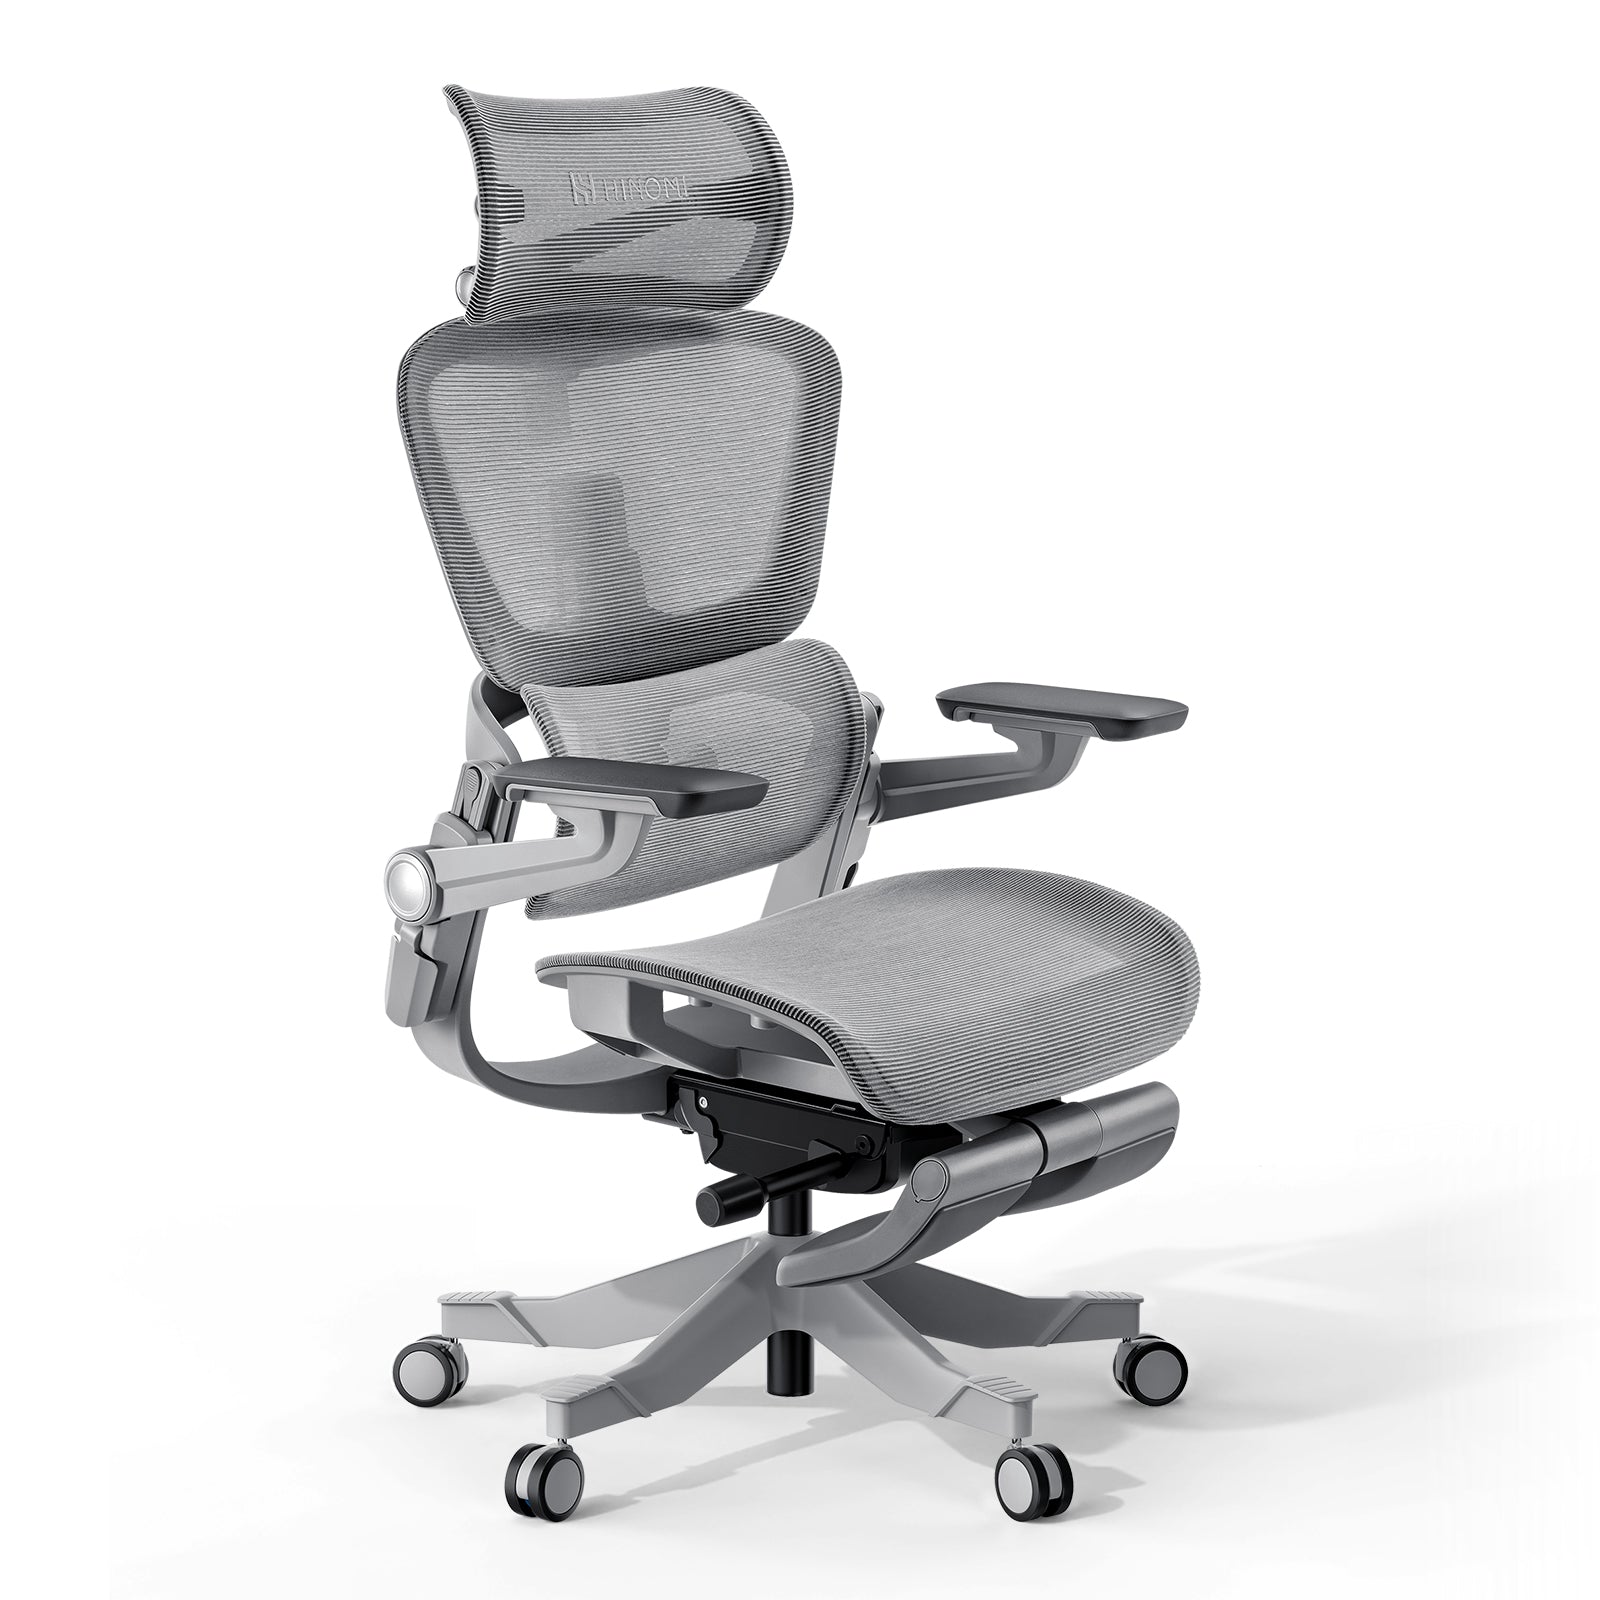 H1ProV2 Ergonomic Office Chair with Fantastic Lumbar Support, Coral Red / V2 Extra-High (FOR Users 5'10 - 6'9 Tall)